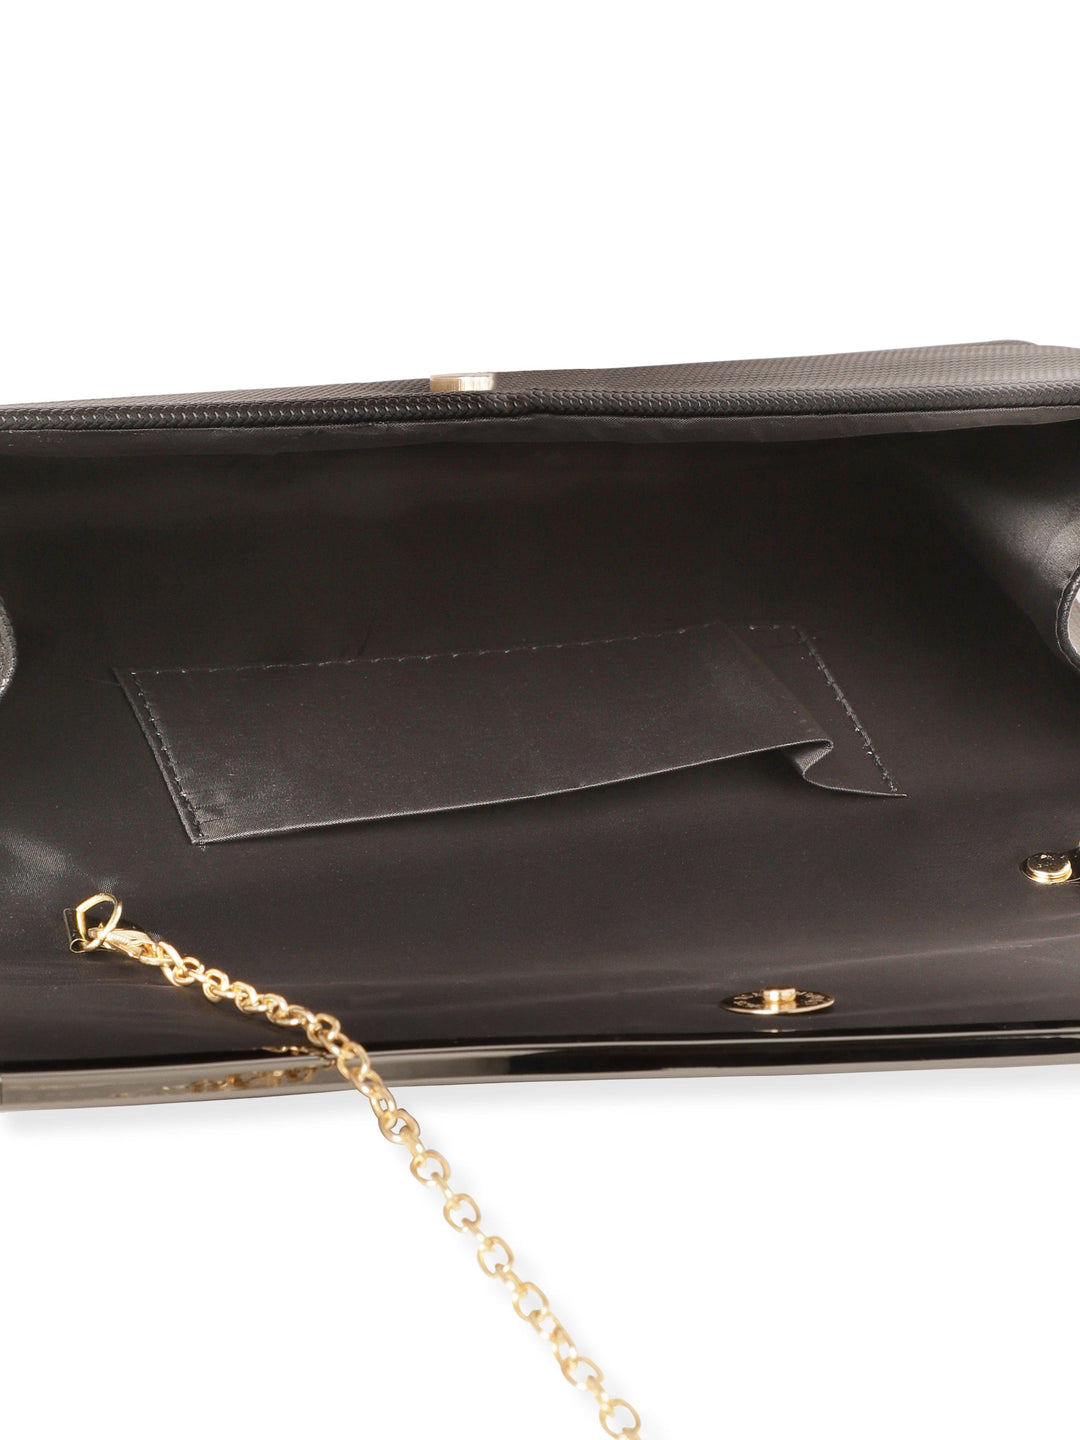 Rubans Timeless Chic Handcrafted Grey Textured Clutch Bag Handbag, Wallet Accessories & Clutches